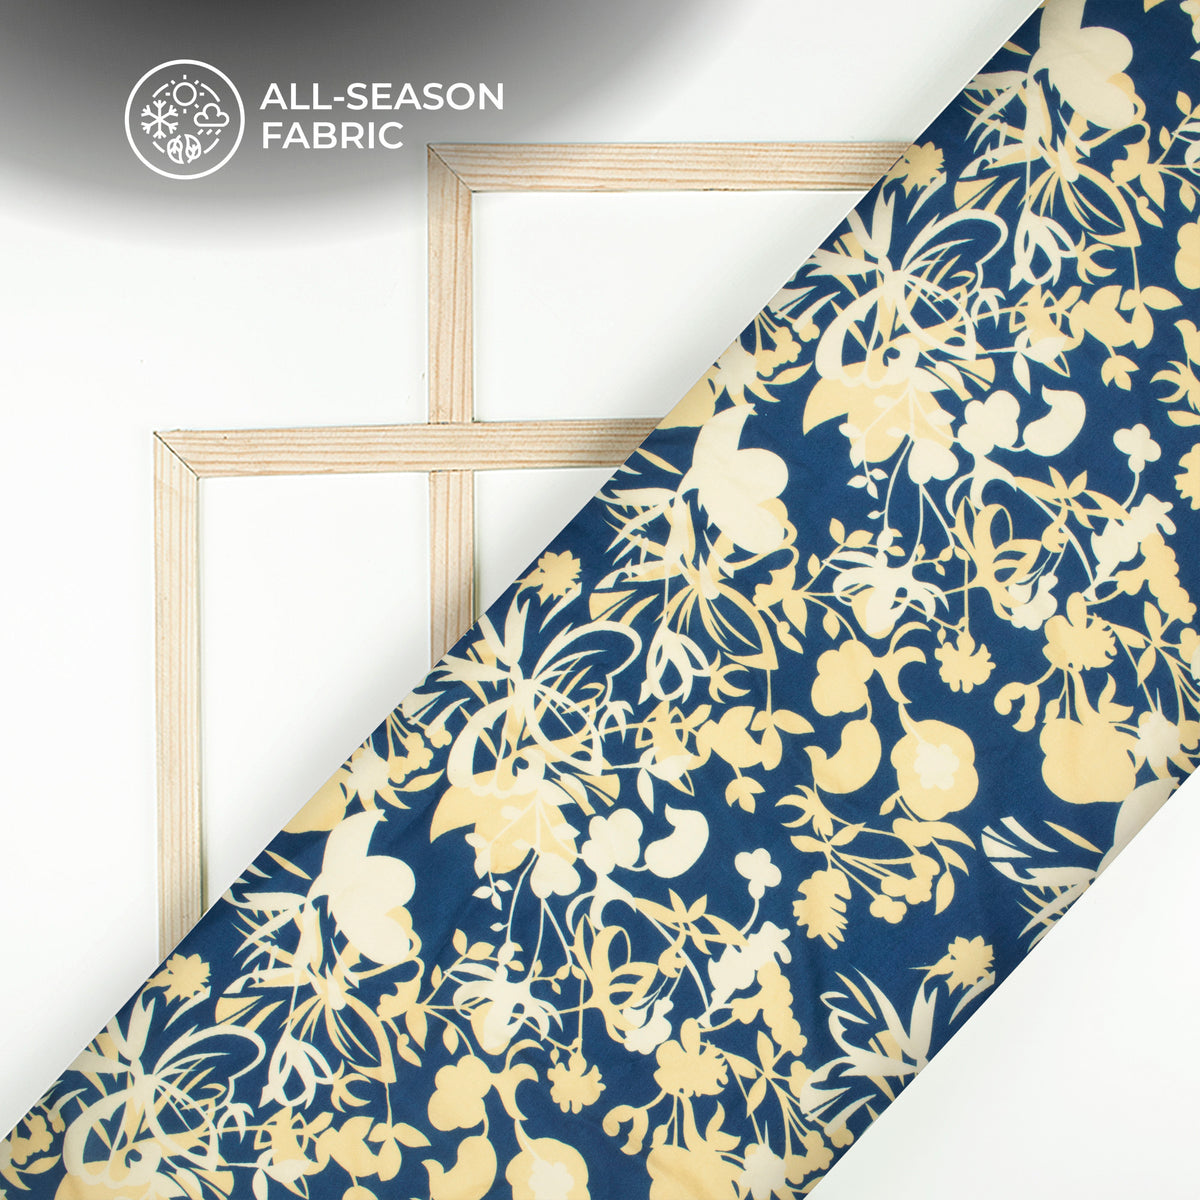 Blossom Bliss: Floral Delight Digital Print Cotton Cambric Fabric